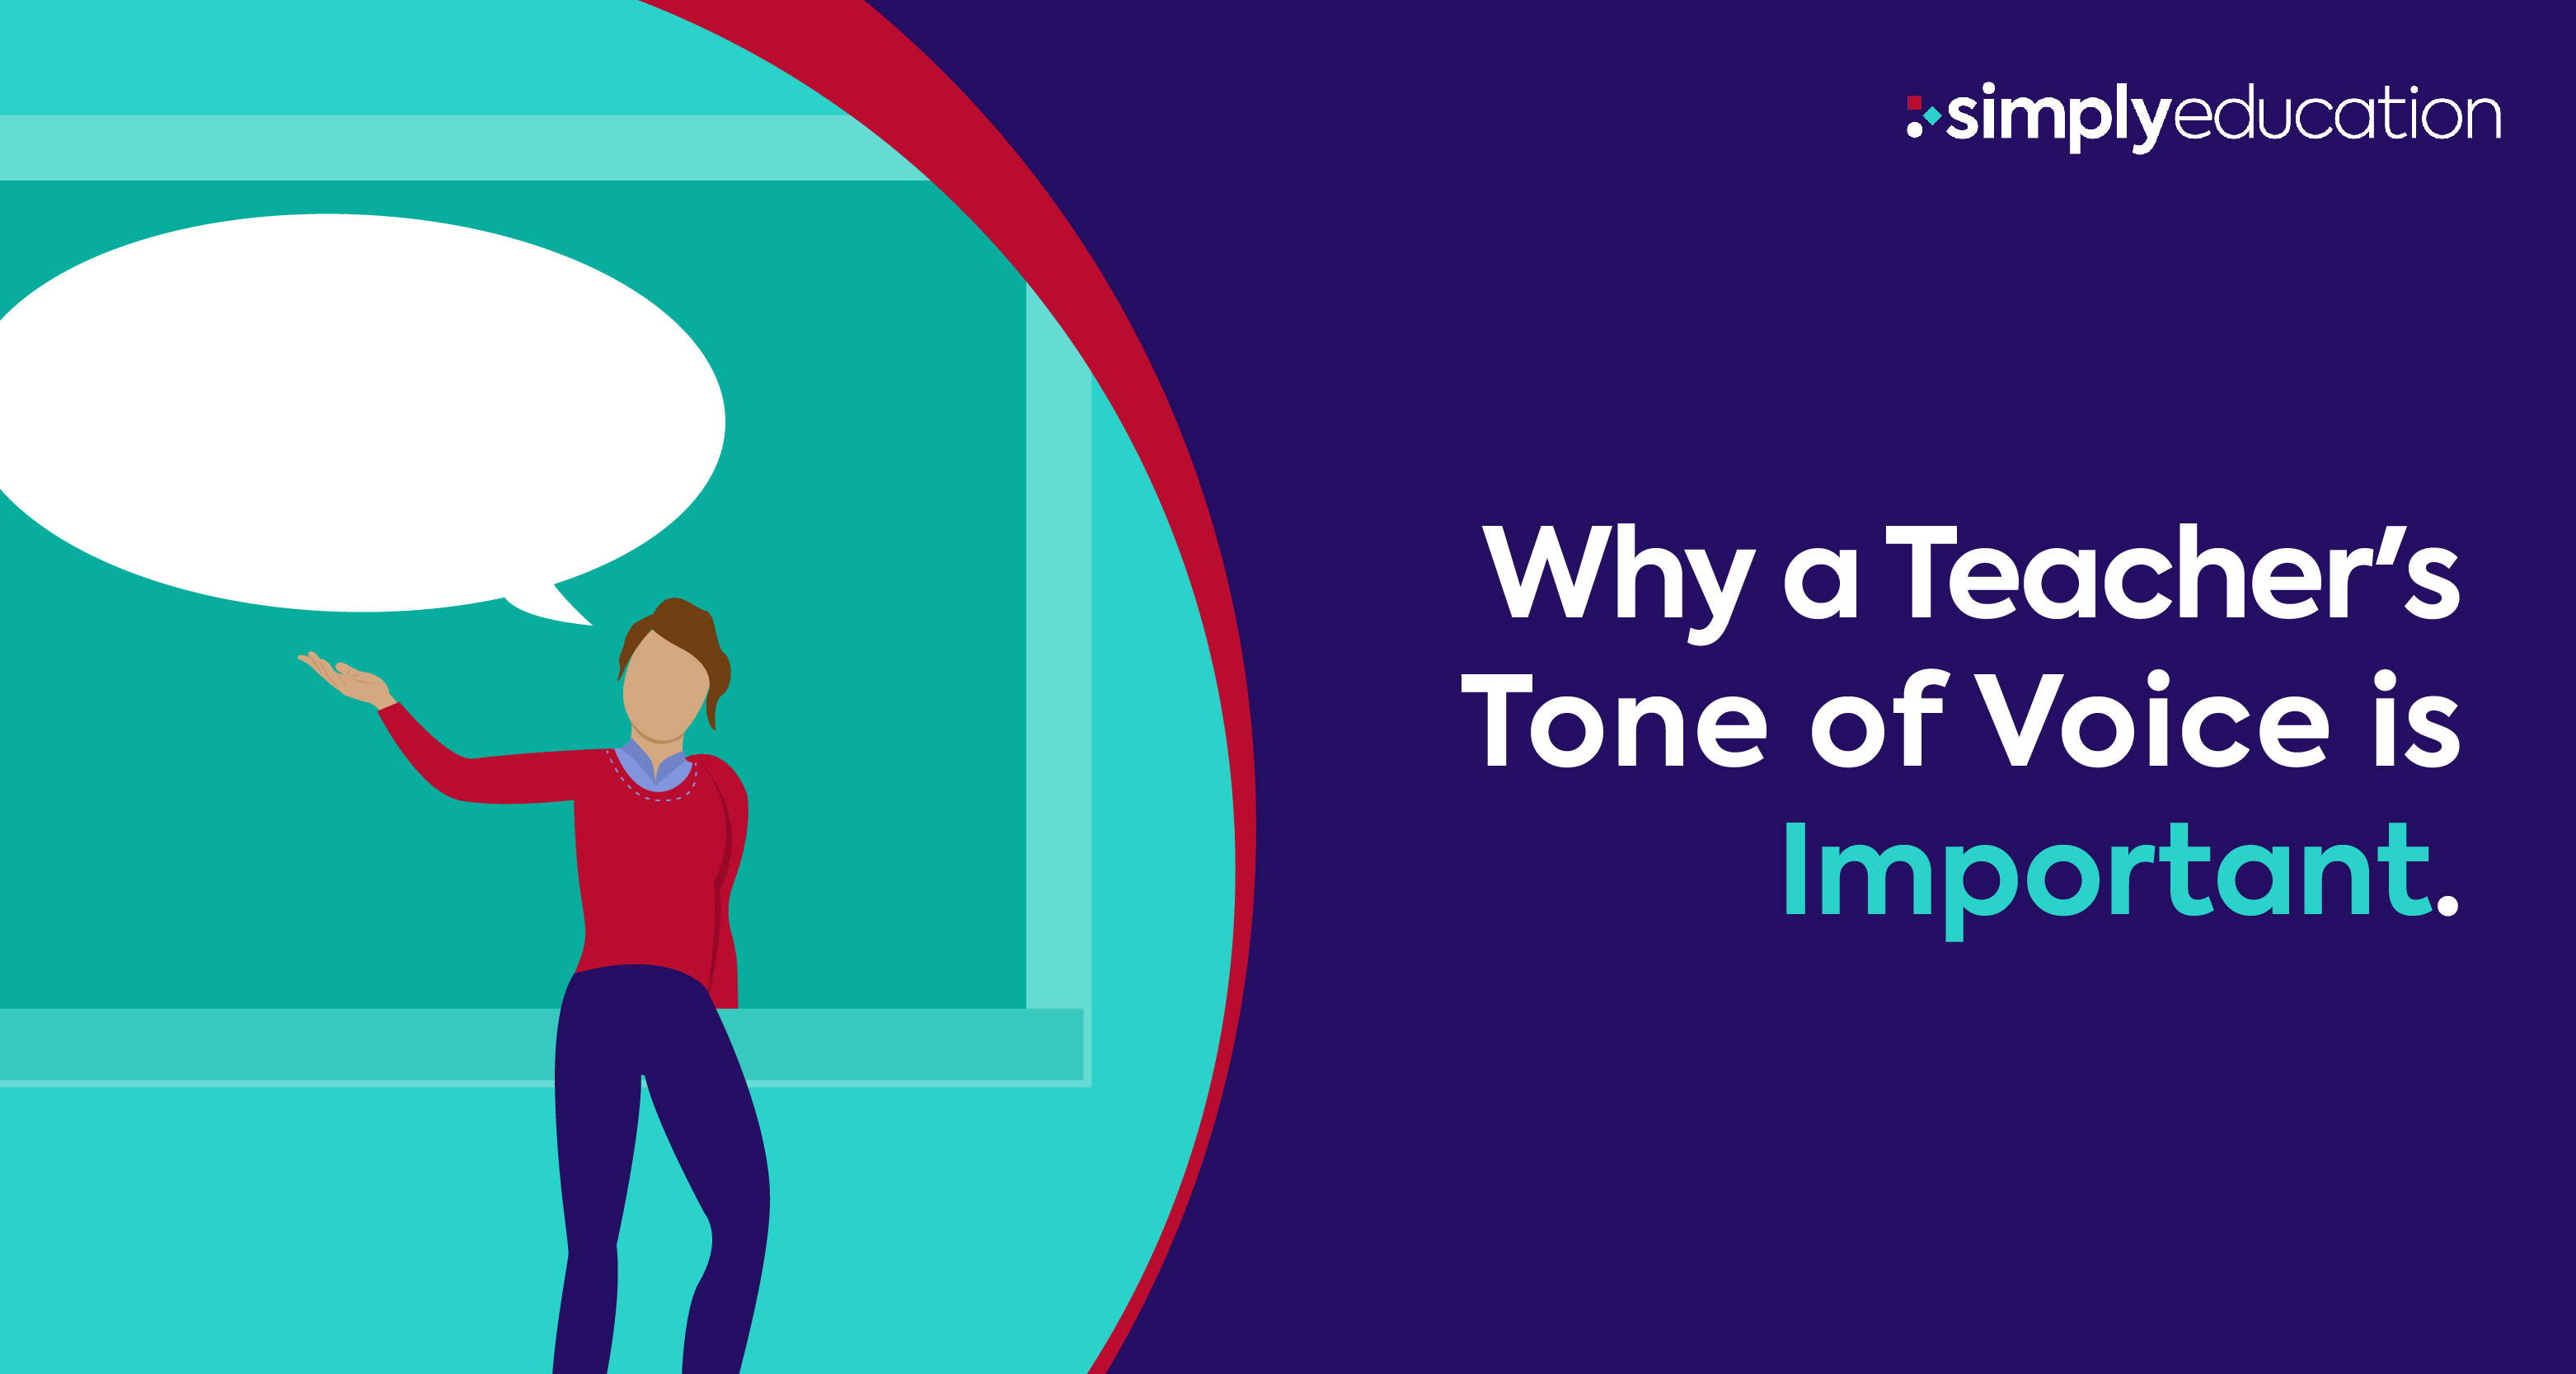 Tone of Voice and Speaking Style: What Do They Mean for Your Brand?